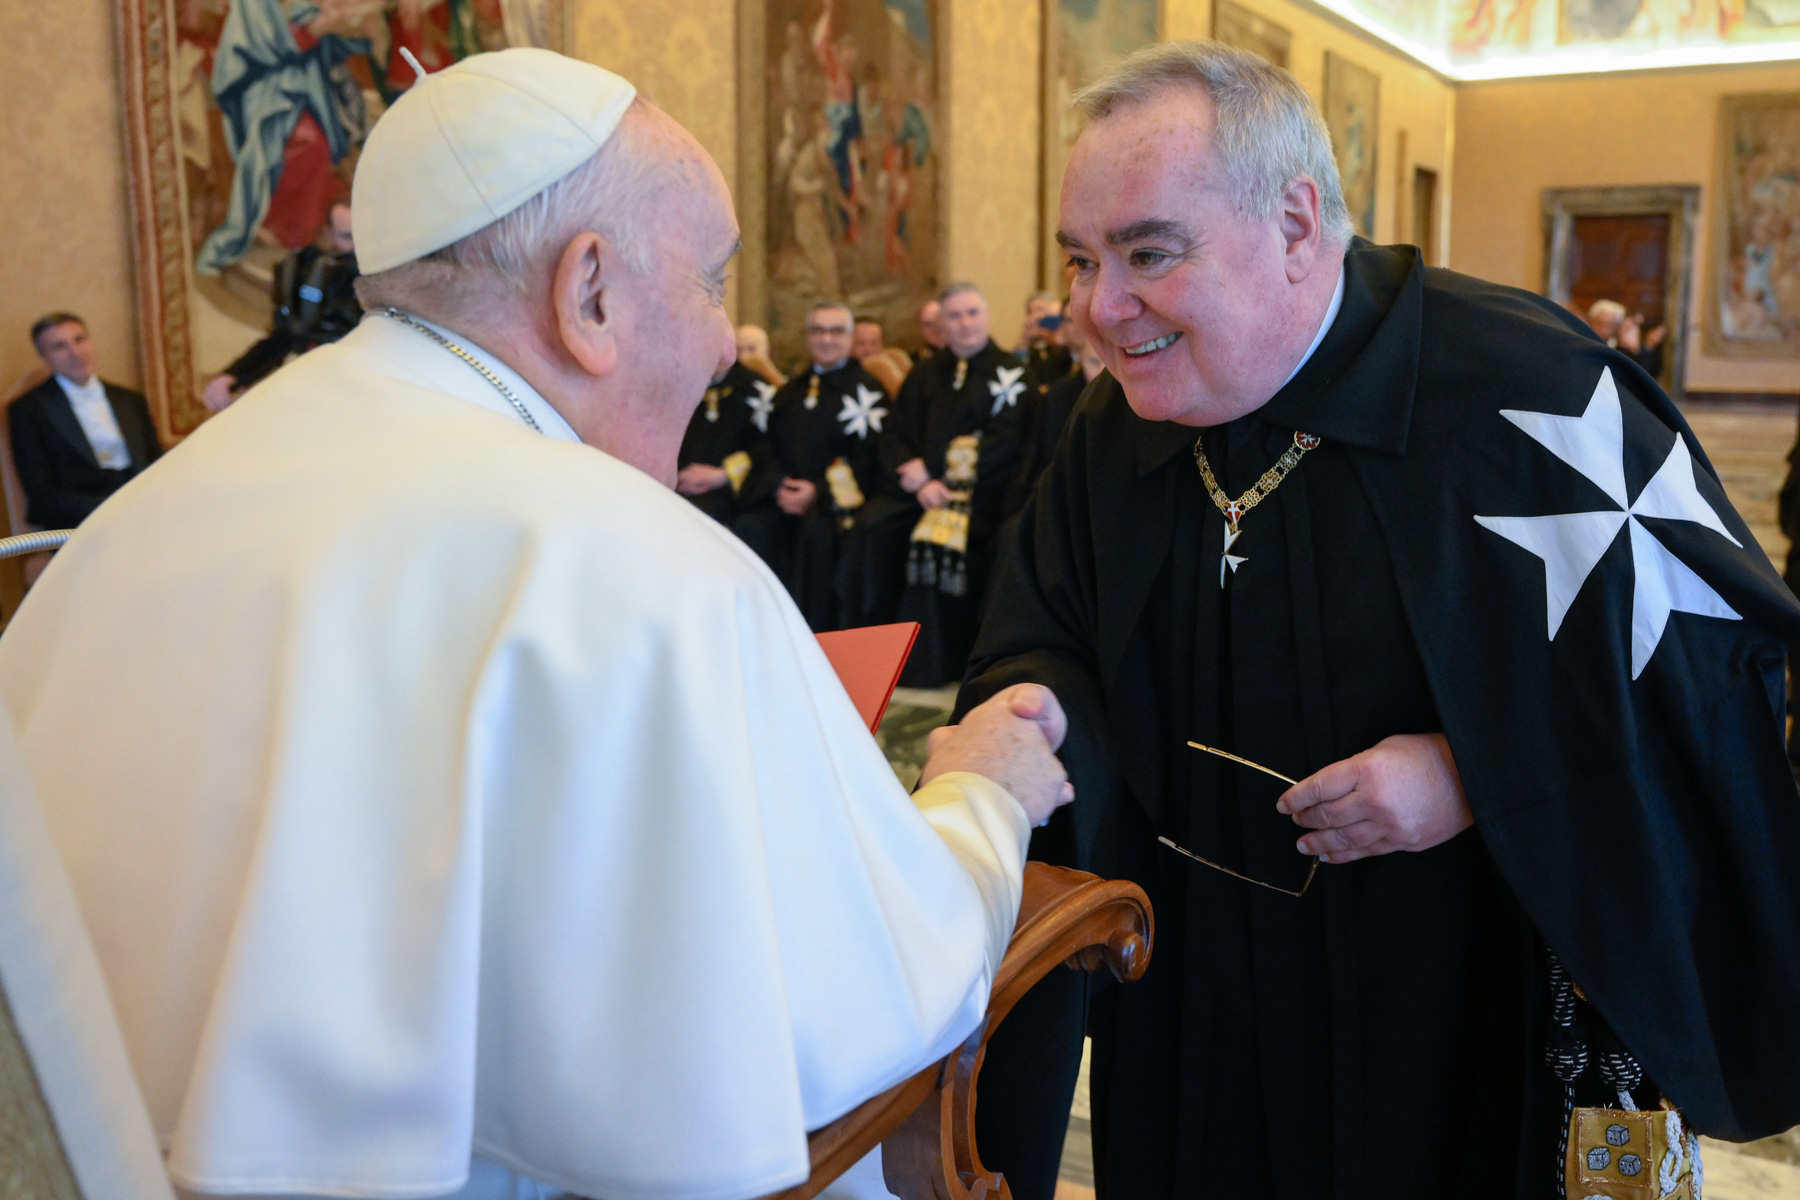 The Grand Master’s best wishes to Pope Francis